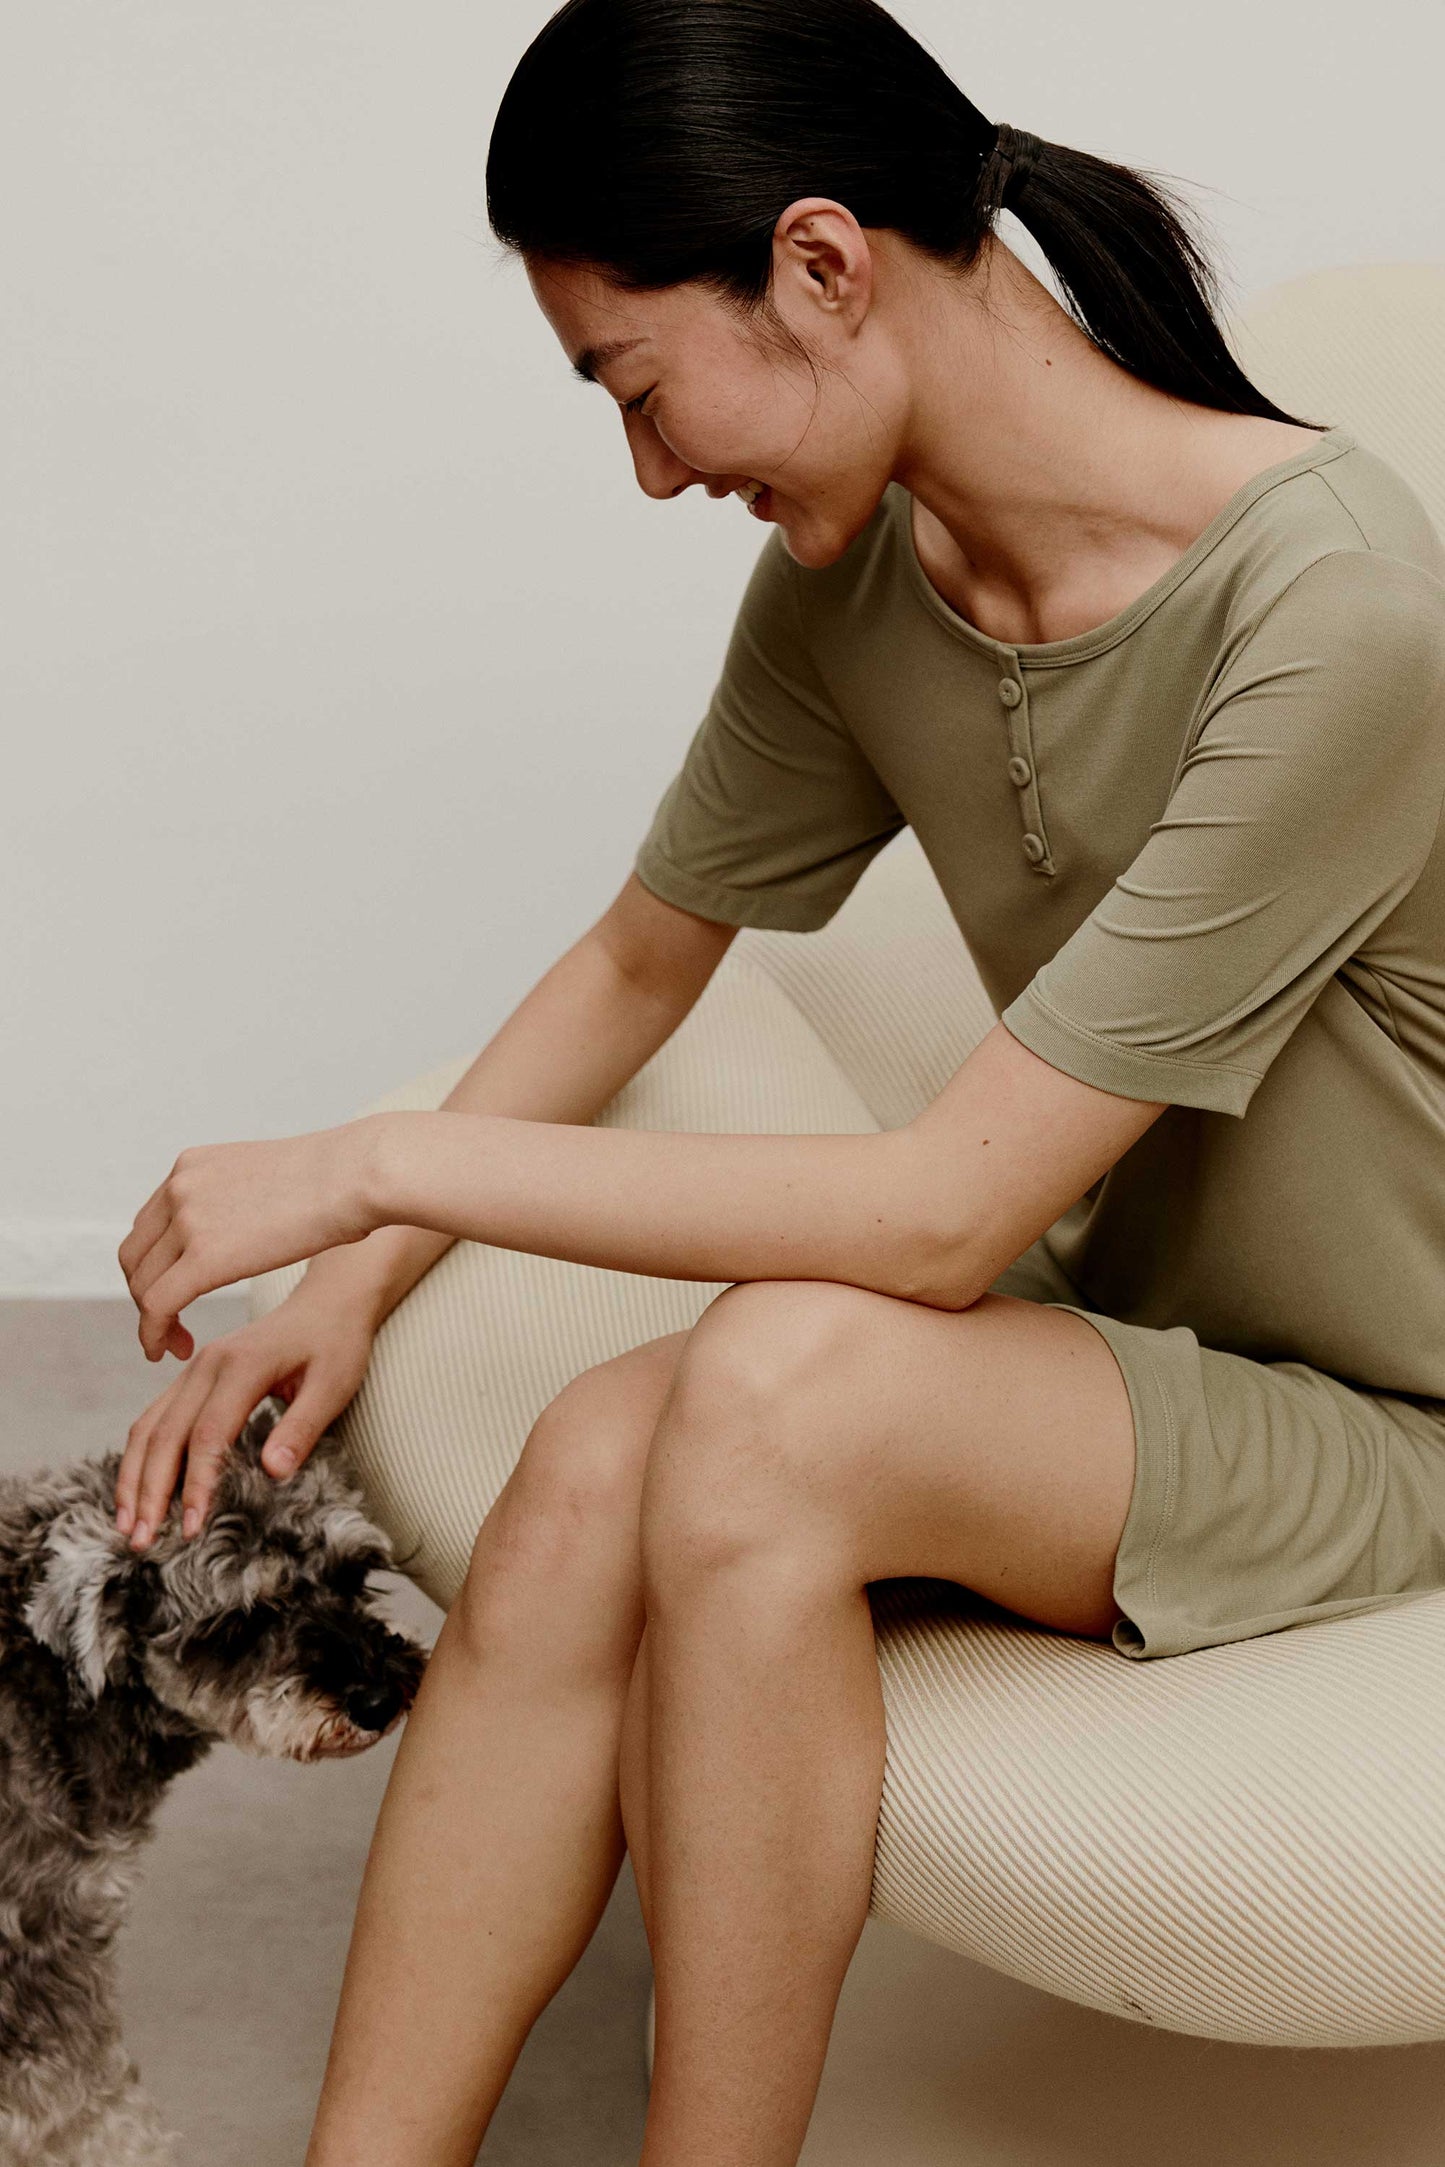 A woman wearing a green pajama dress sitting on the white sofa and petting a puppy.